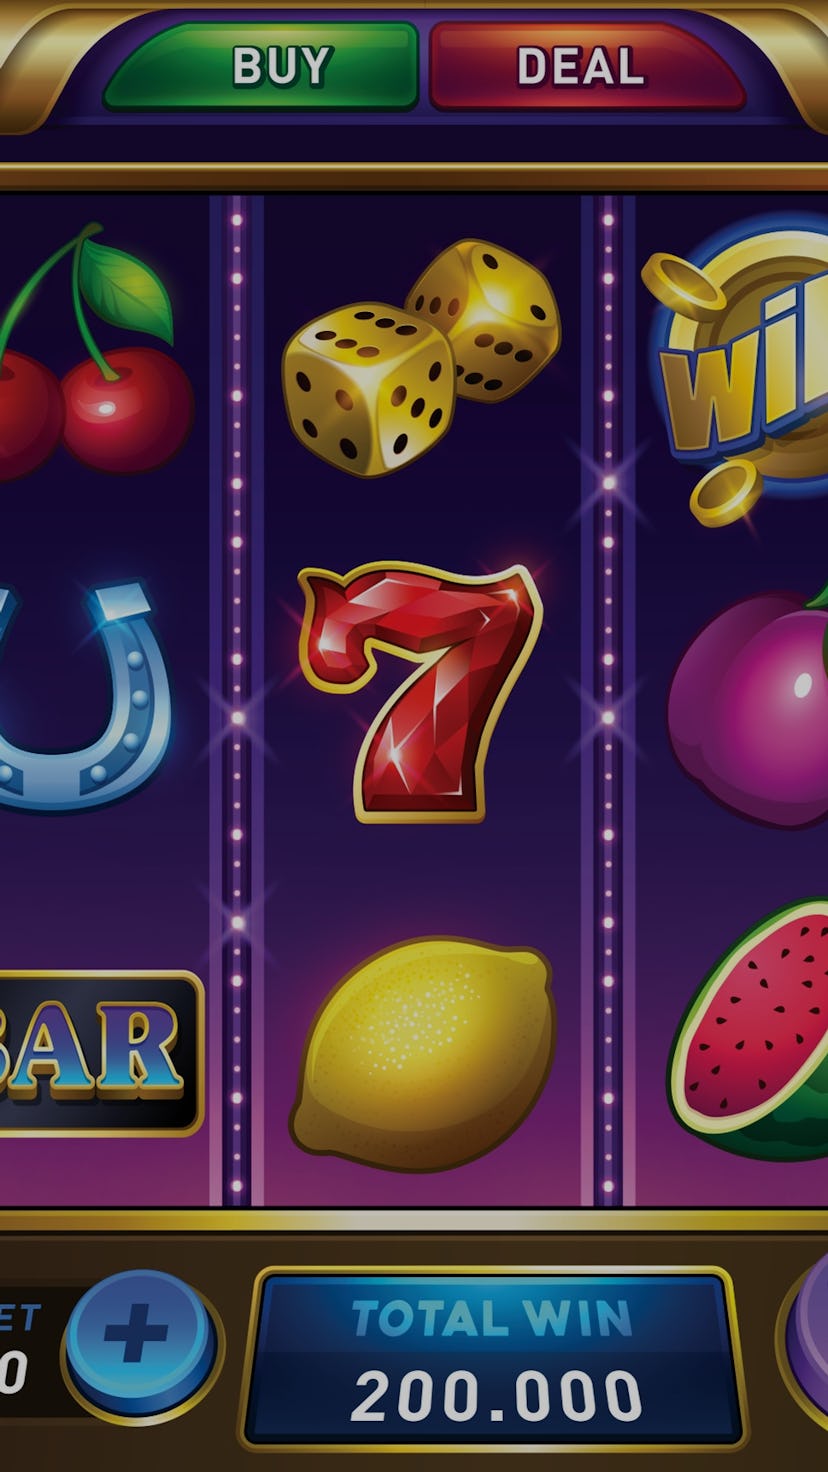 Main screen for slots games. Slots Gameplay icons and buttons. Mobile Game Assets. user interface. c...